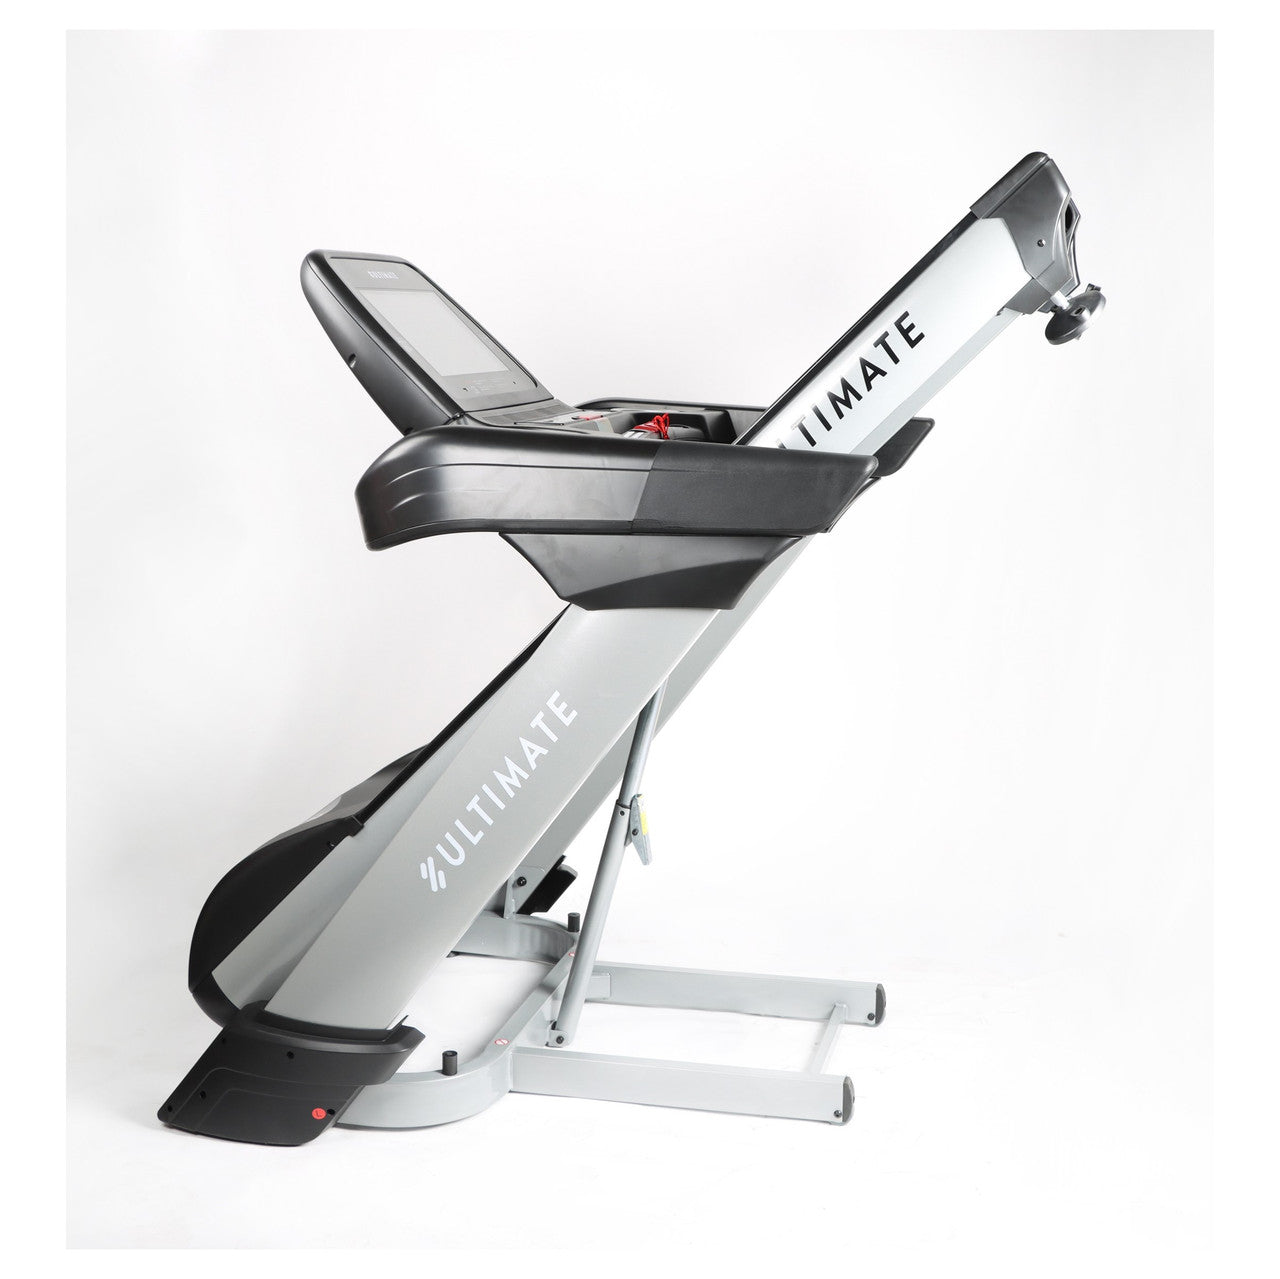 Trotadora Electrica Ultimate Fitness Xt900 Premium Touch High Performance